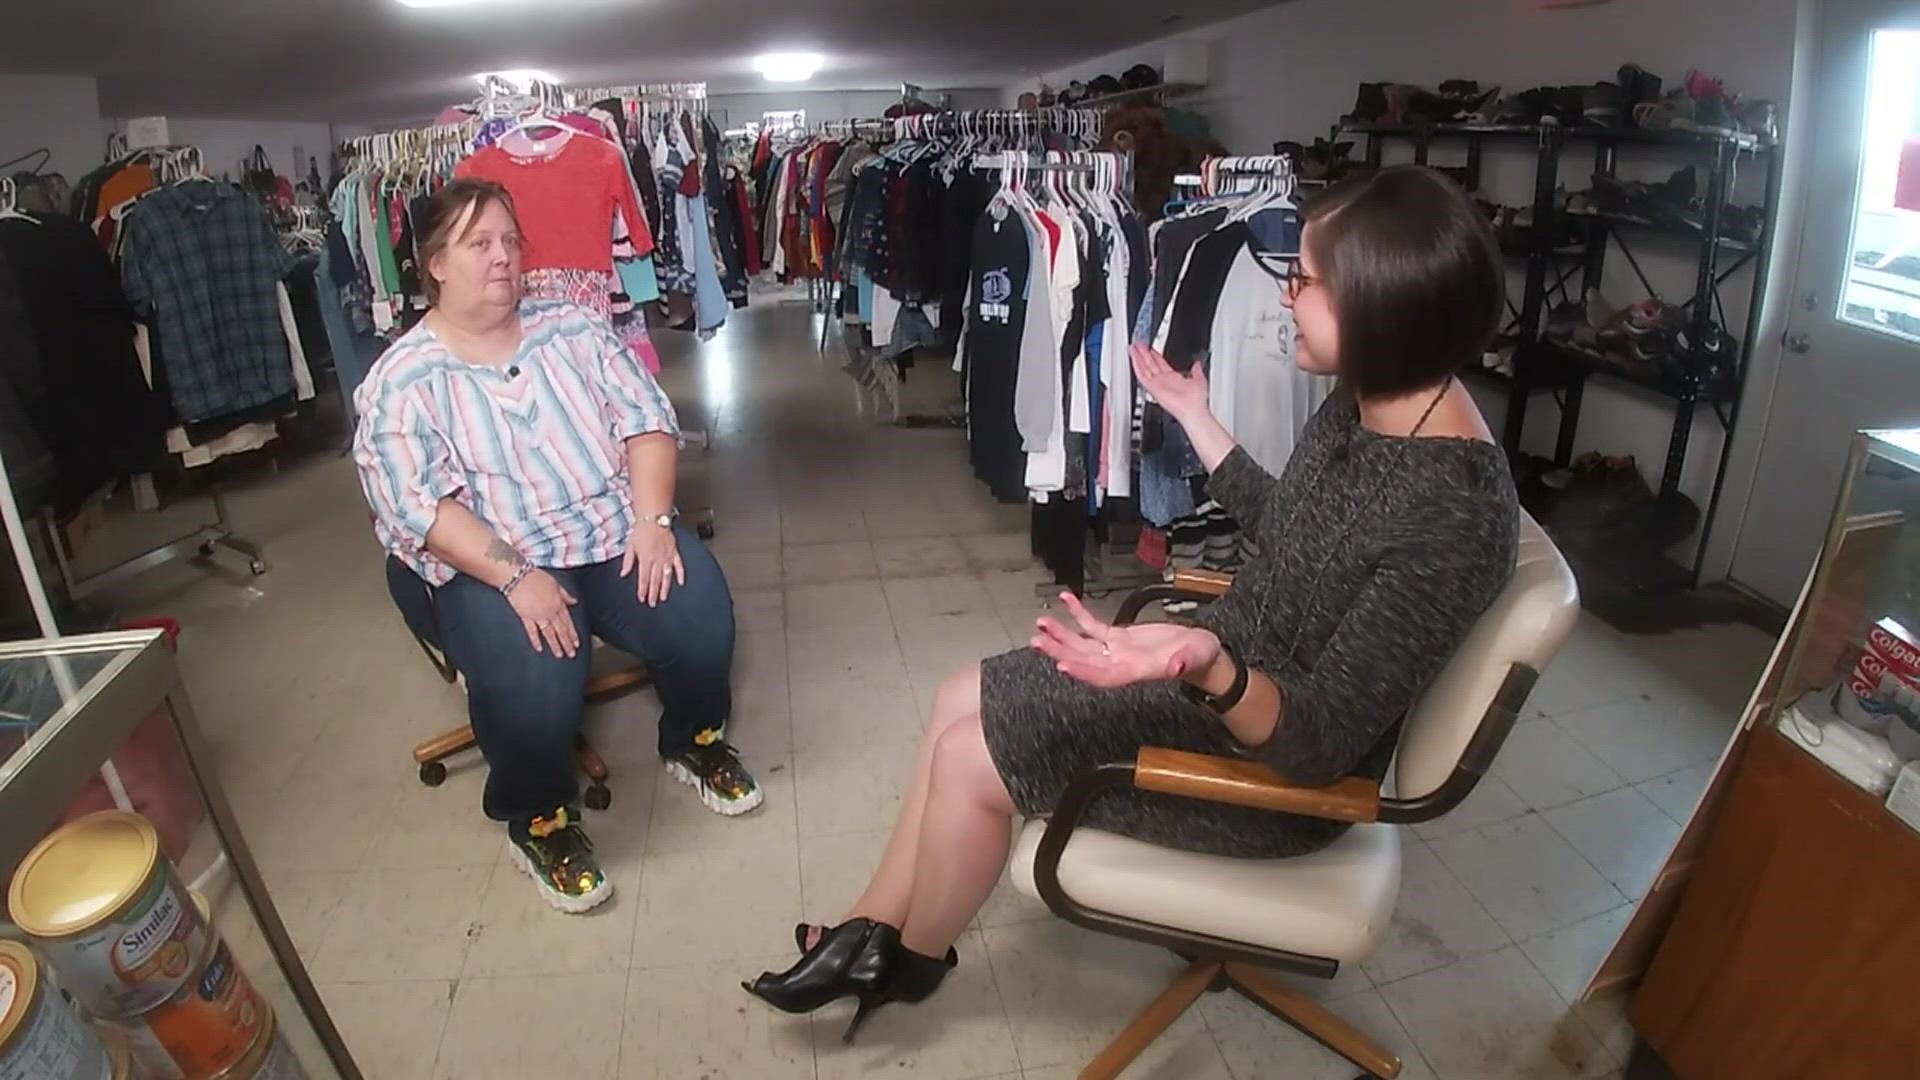 Sherry Bandy is "Multiplying Good" by connecting customers with clothes, household items and more - all for free. She tells us all about it in this interview.